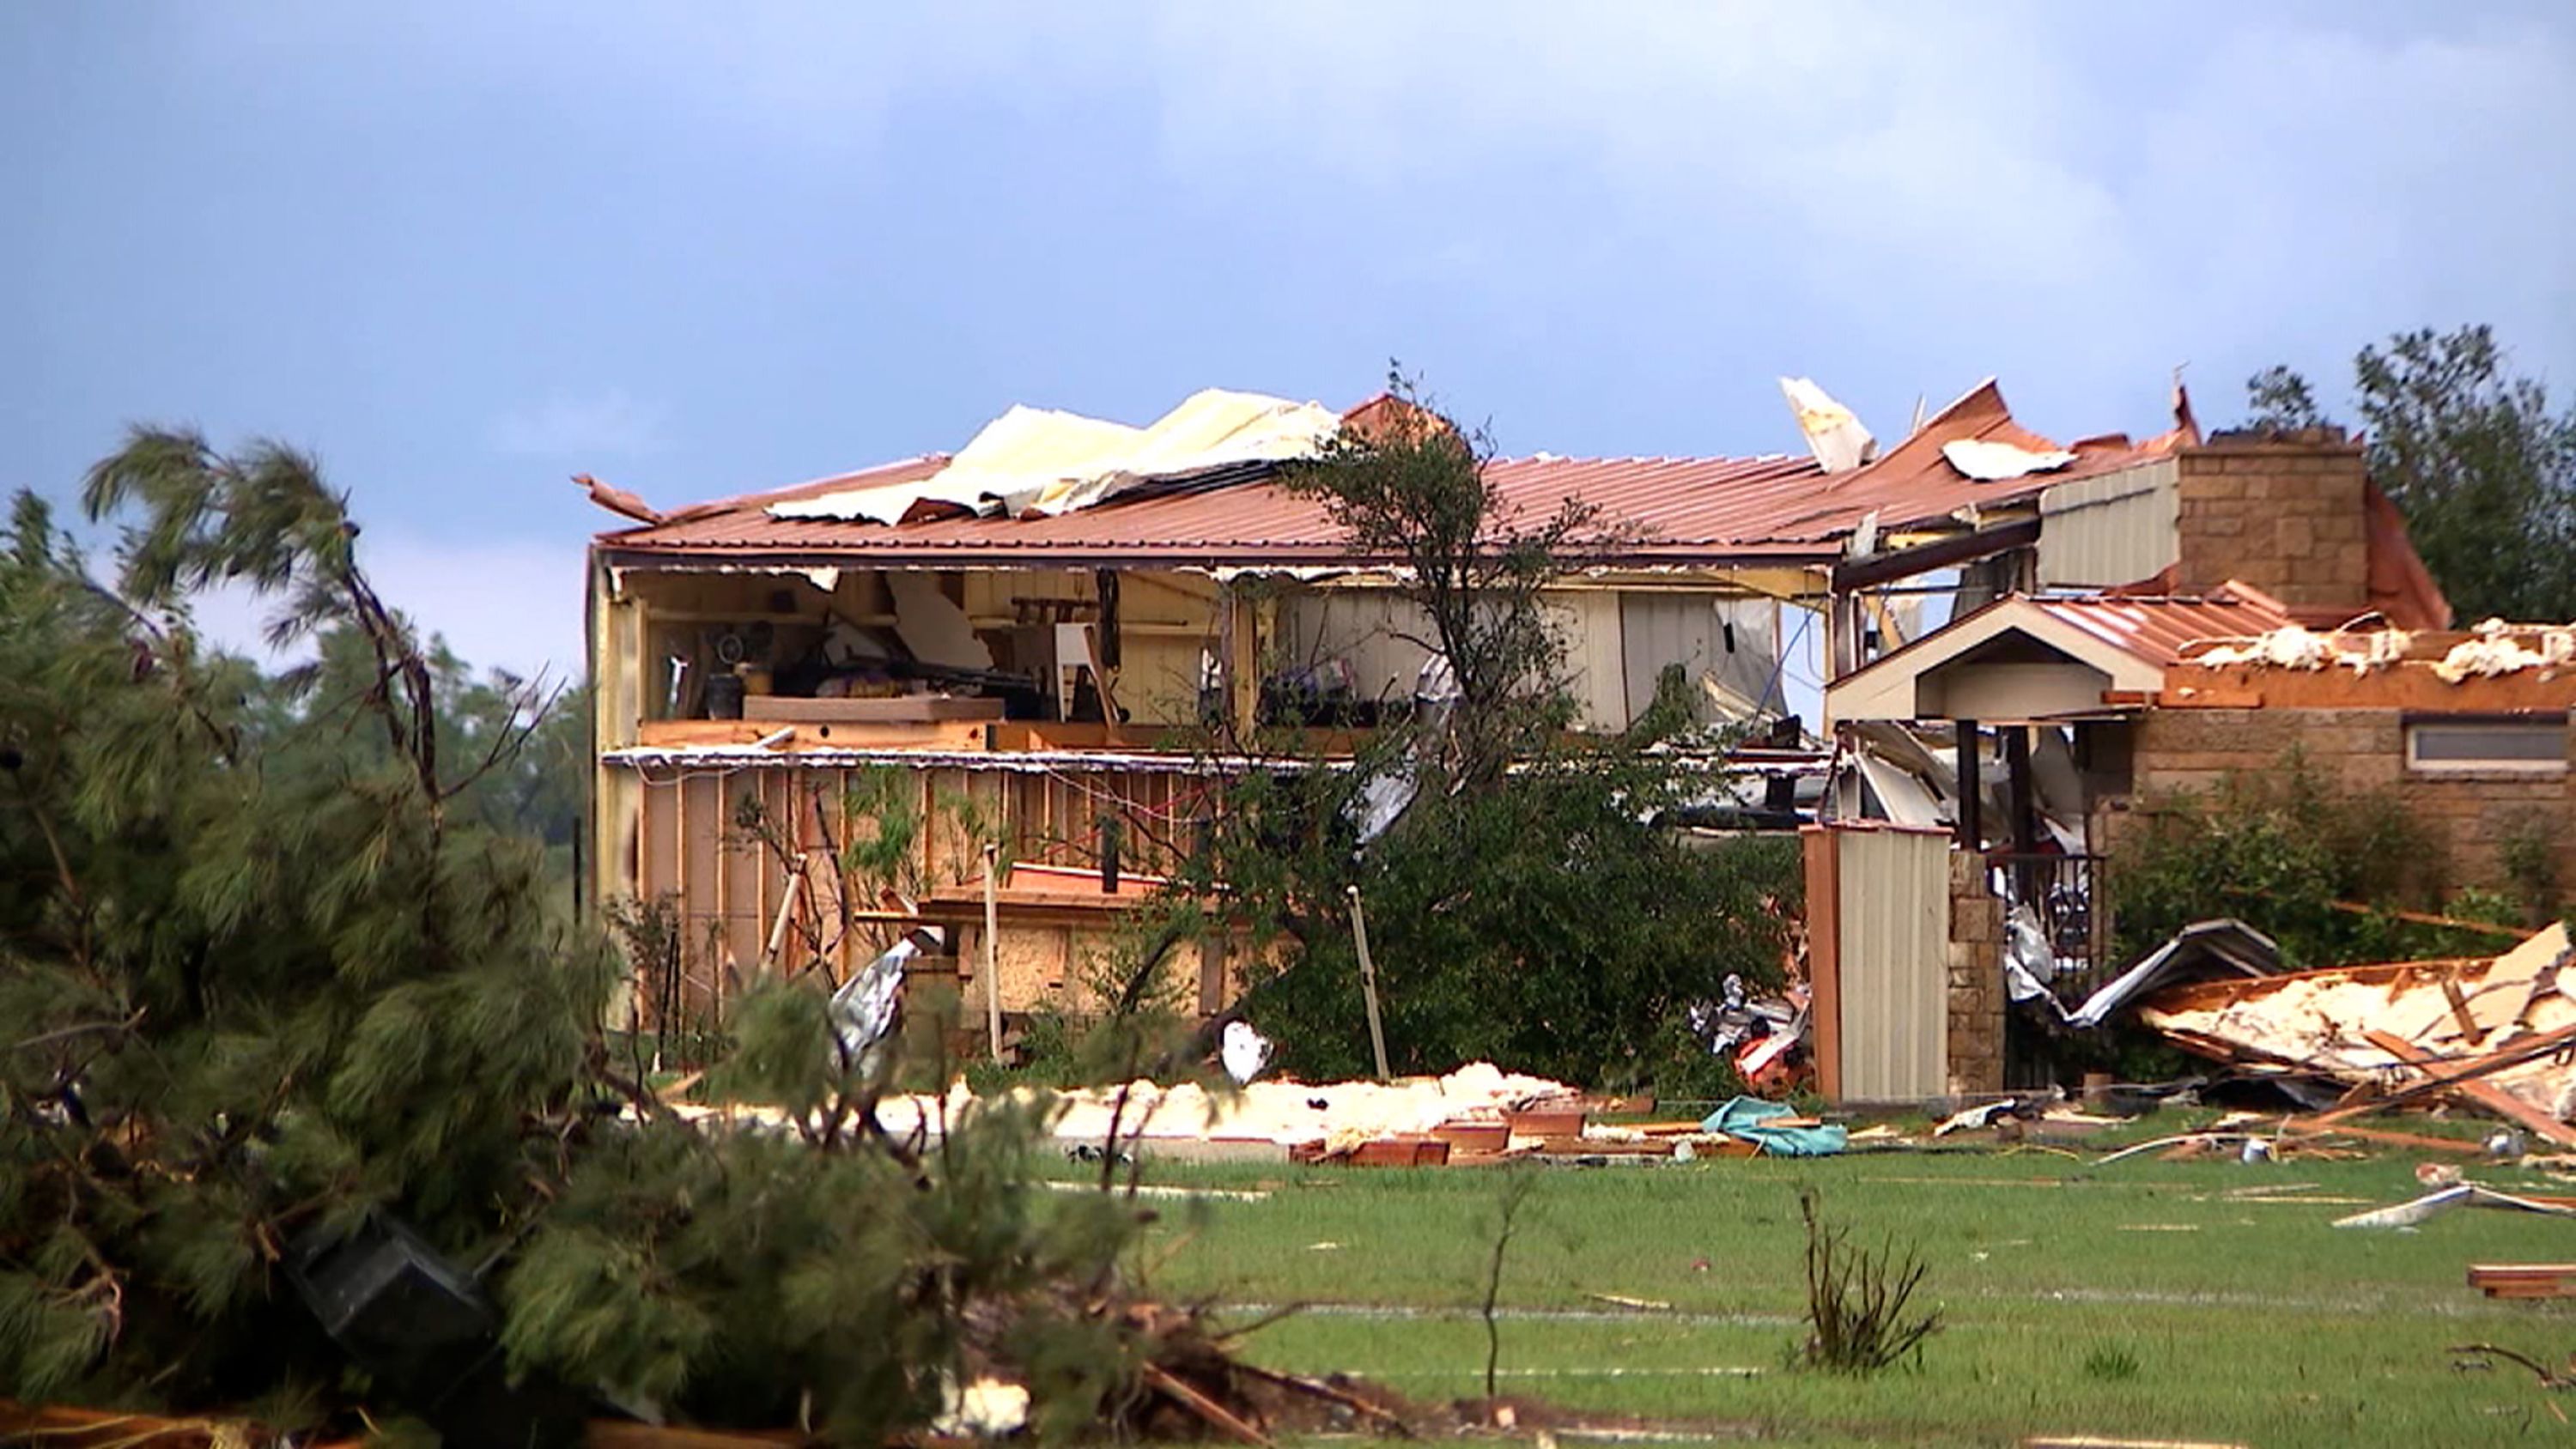 A home damaged by storms in between Hawley and Hodges, Texas, May 2.